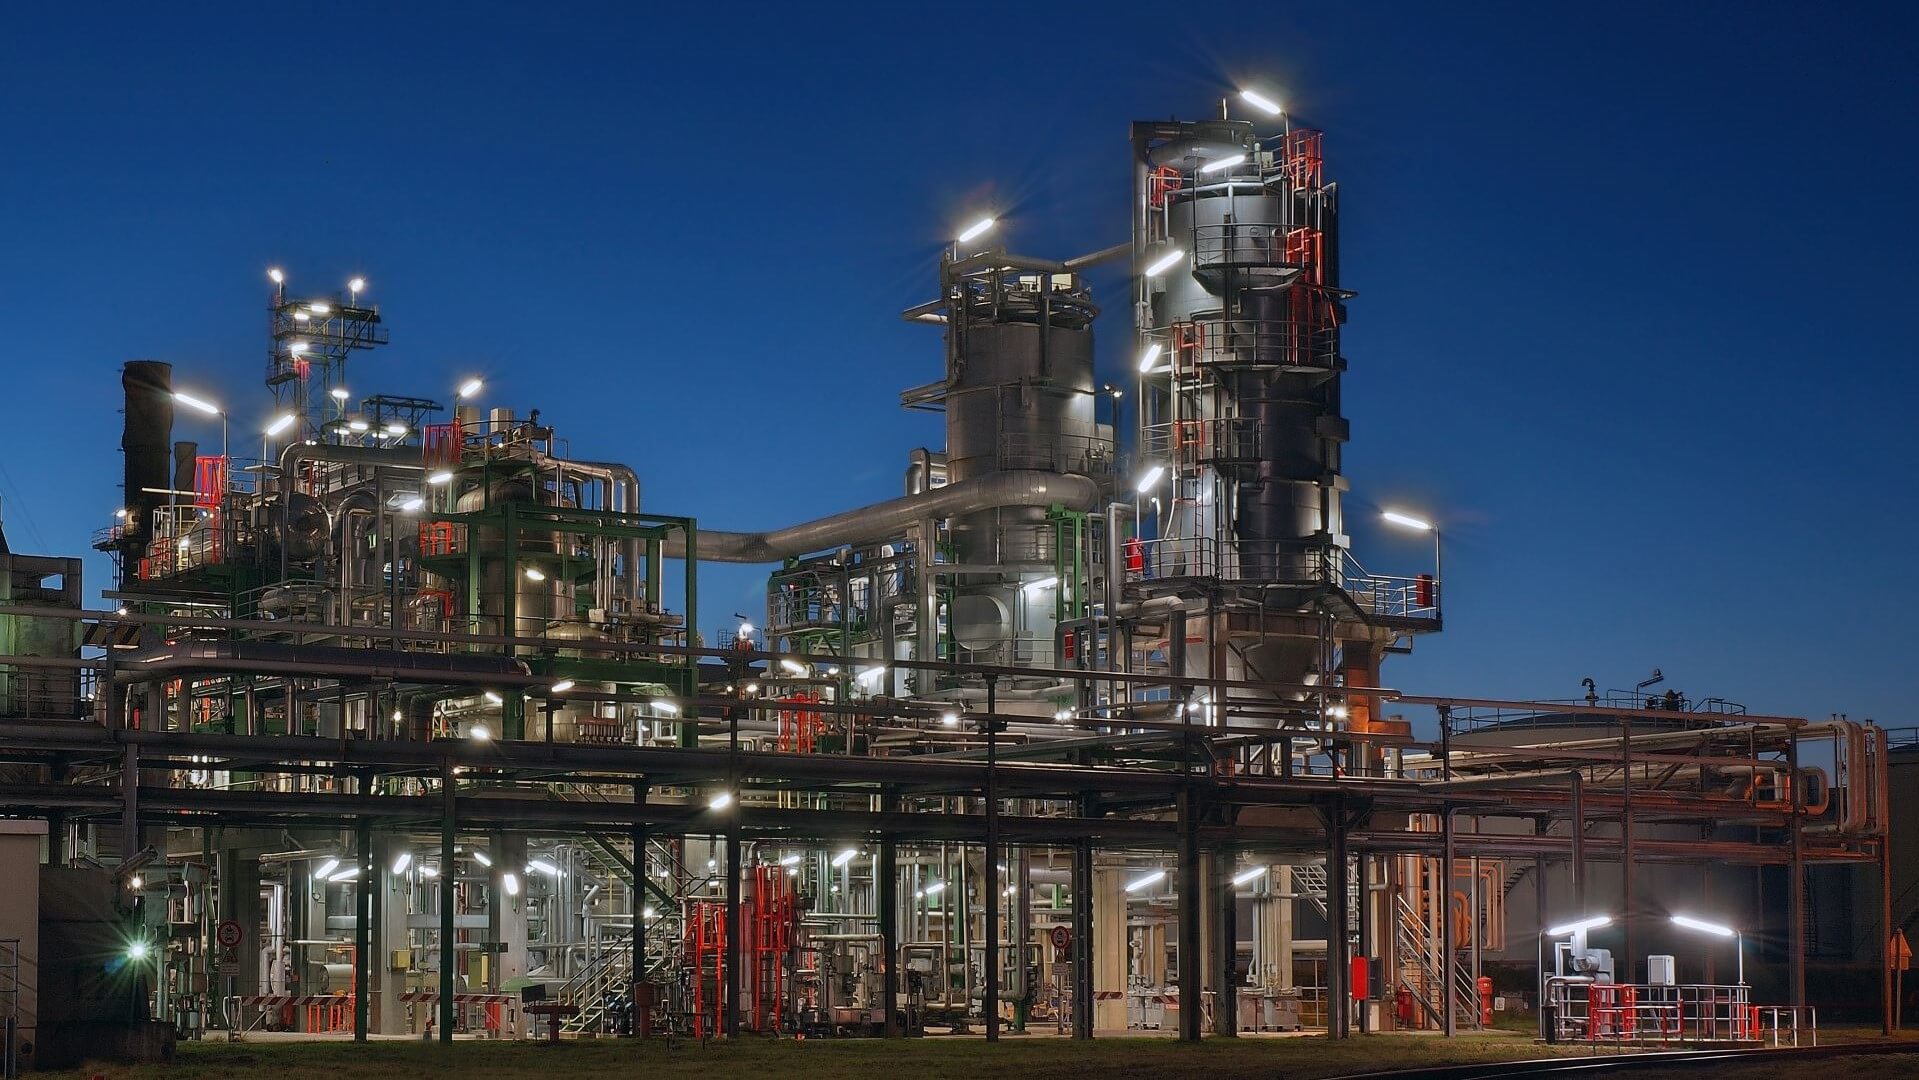 Night view of BP’s Lingen refinery in Germany